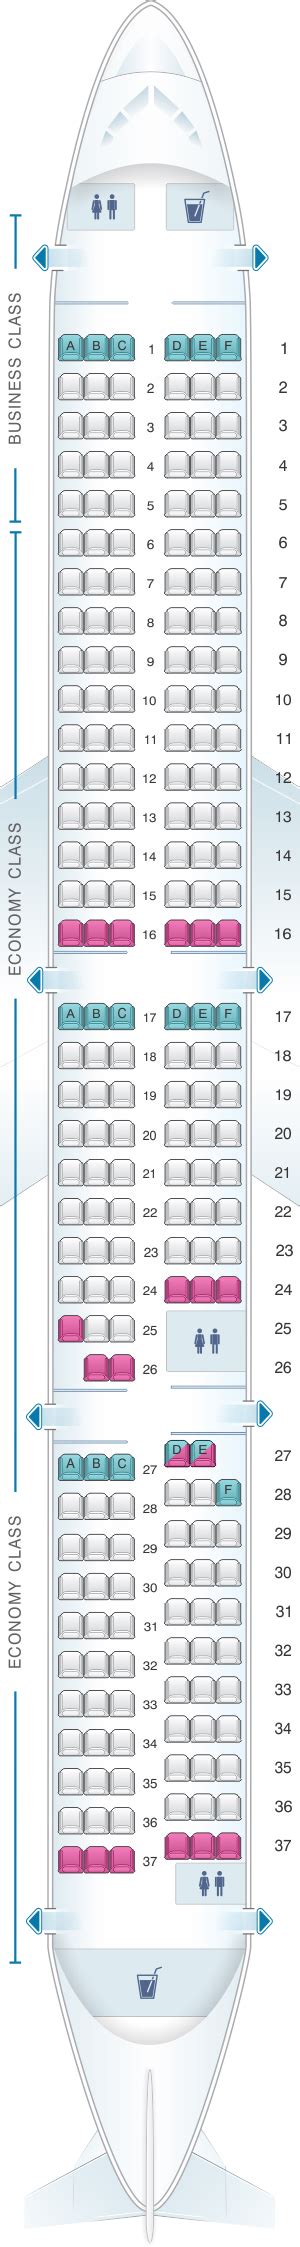 Airbus a321 neo seats. The flight crew for an Airbus A380 airplane depends on the seating configuration and duration of the flight. For example, Emirates Airline operated with a total crew of 31 on the w... 